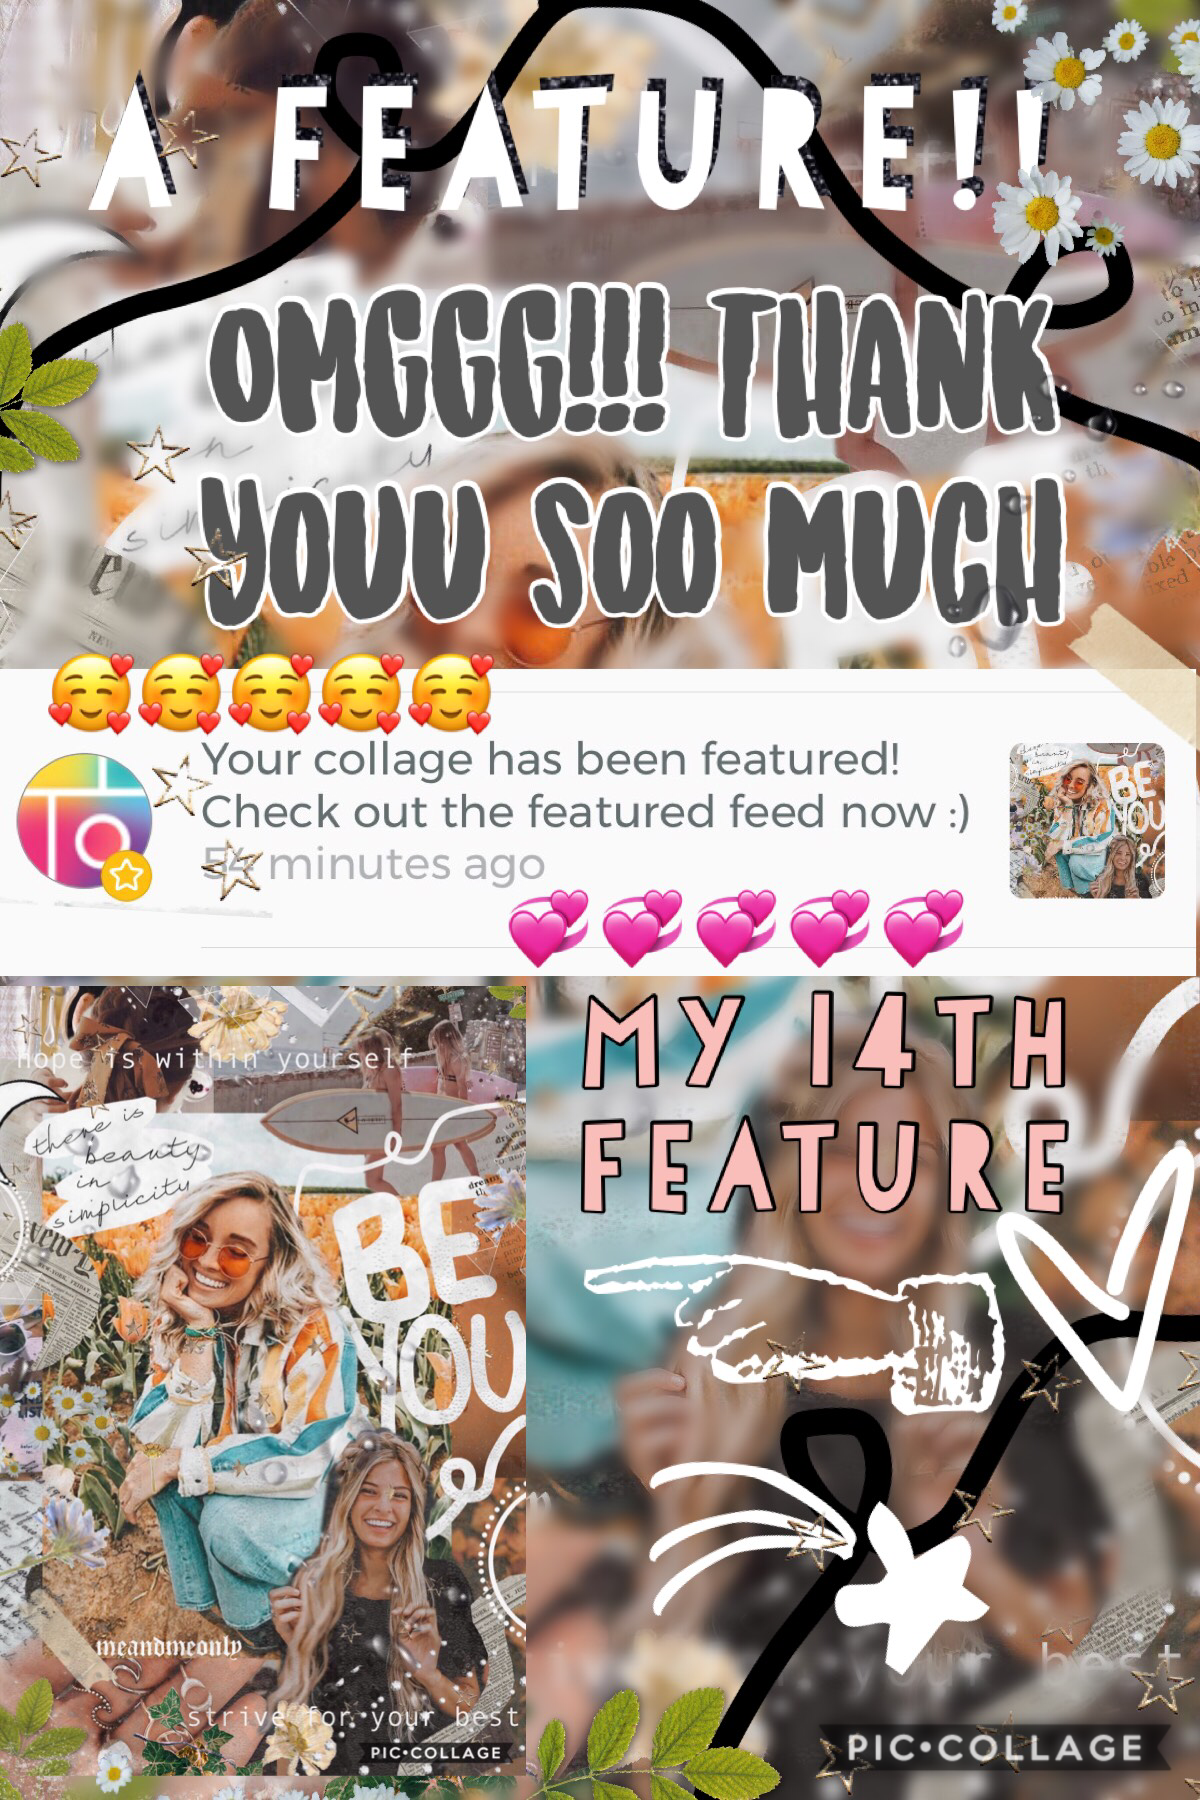 OMGG!!! thank youu soo much @piccollage for my 14th feature!! 💞 love you all soo much ❤️ and I’ll be posting a new edit tomorrow 🌿✨ goodnight xoxo
and Alissa I’ll miss you soo much😭🌸💘